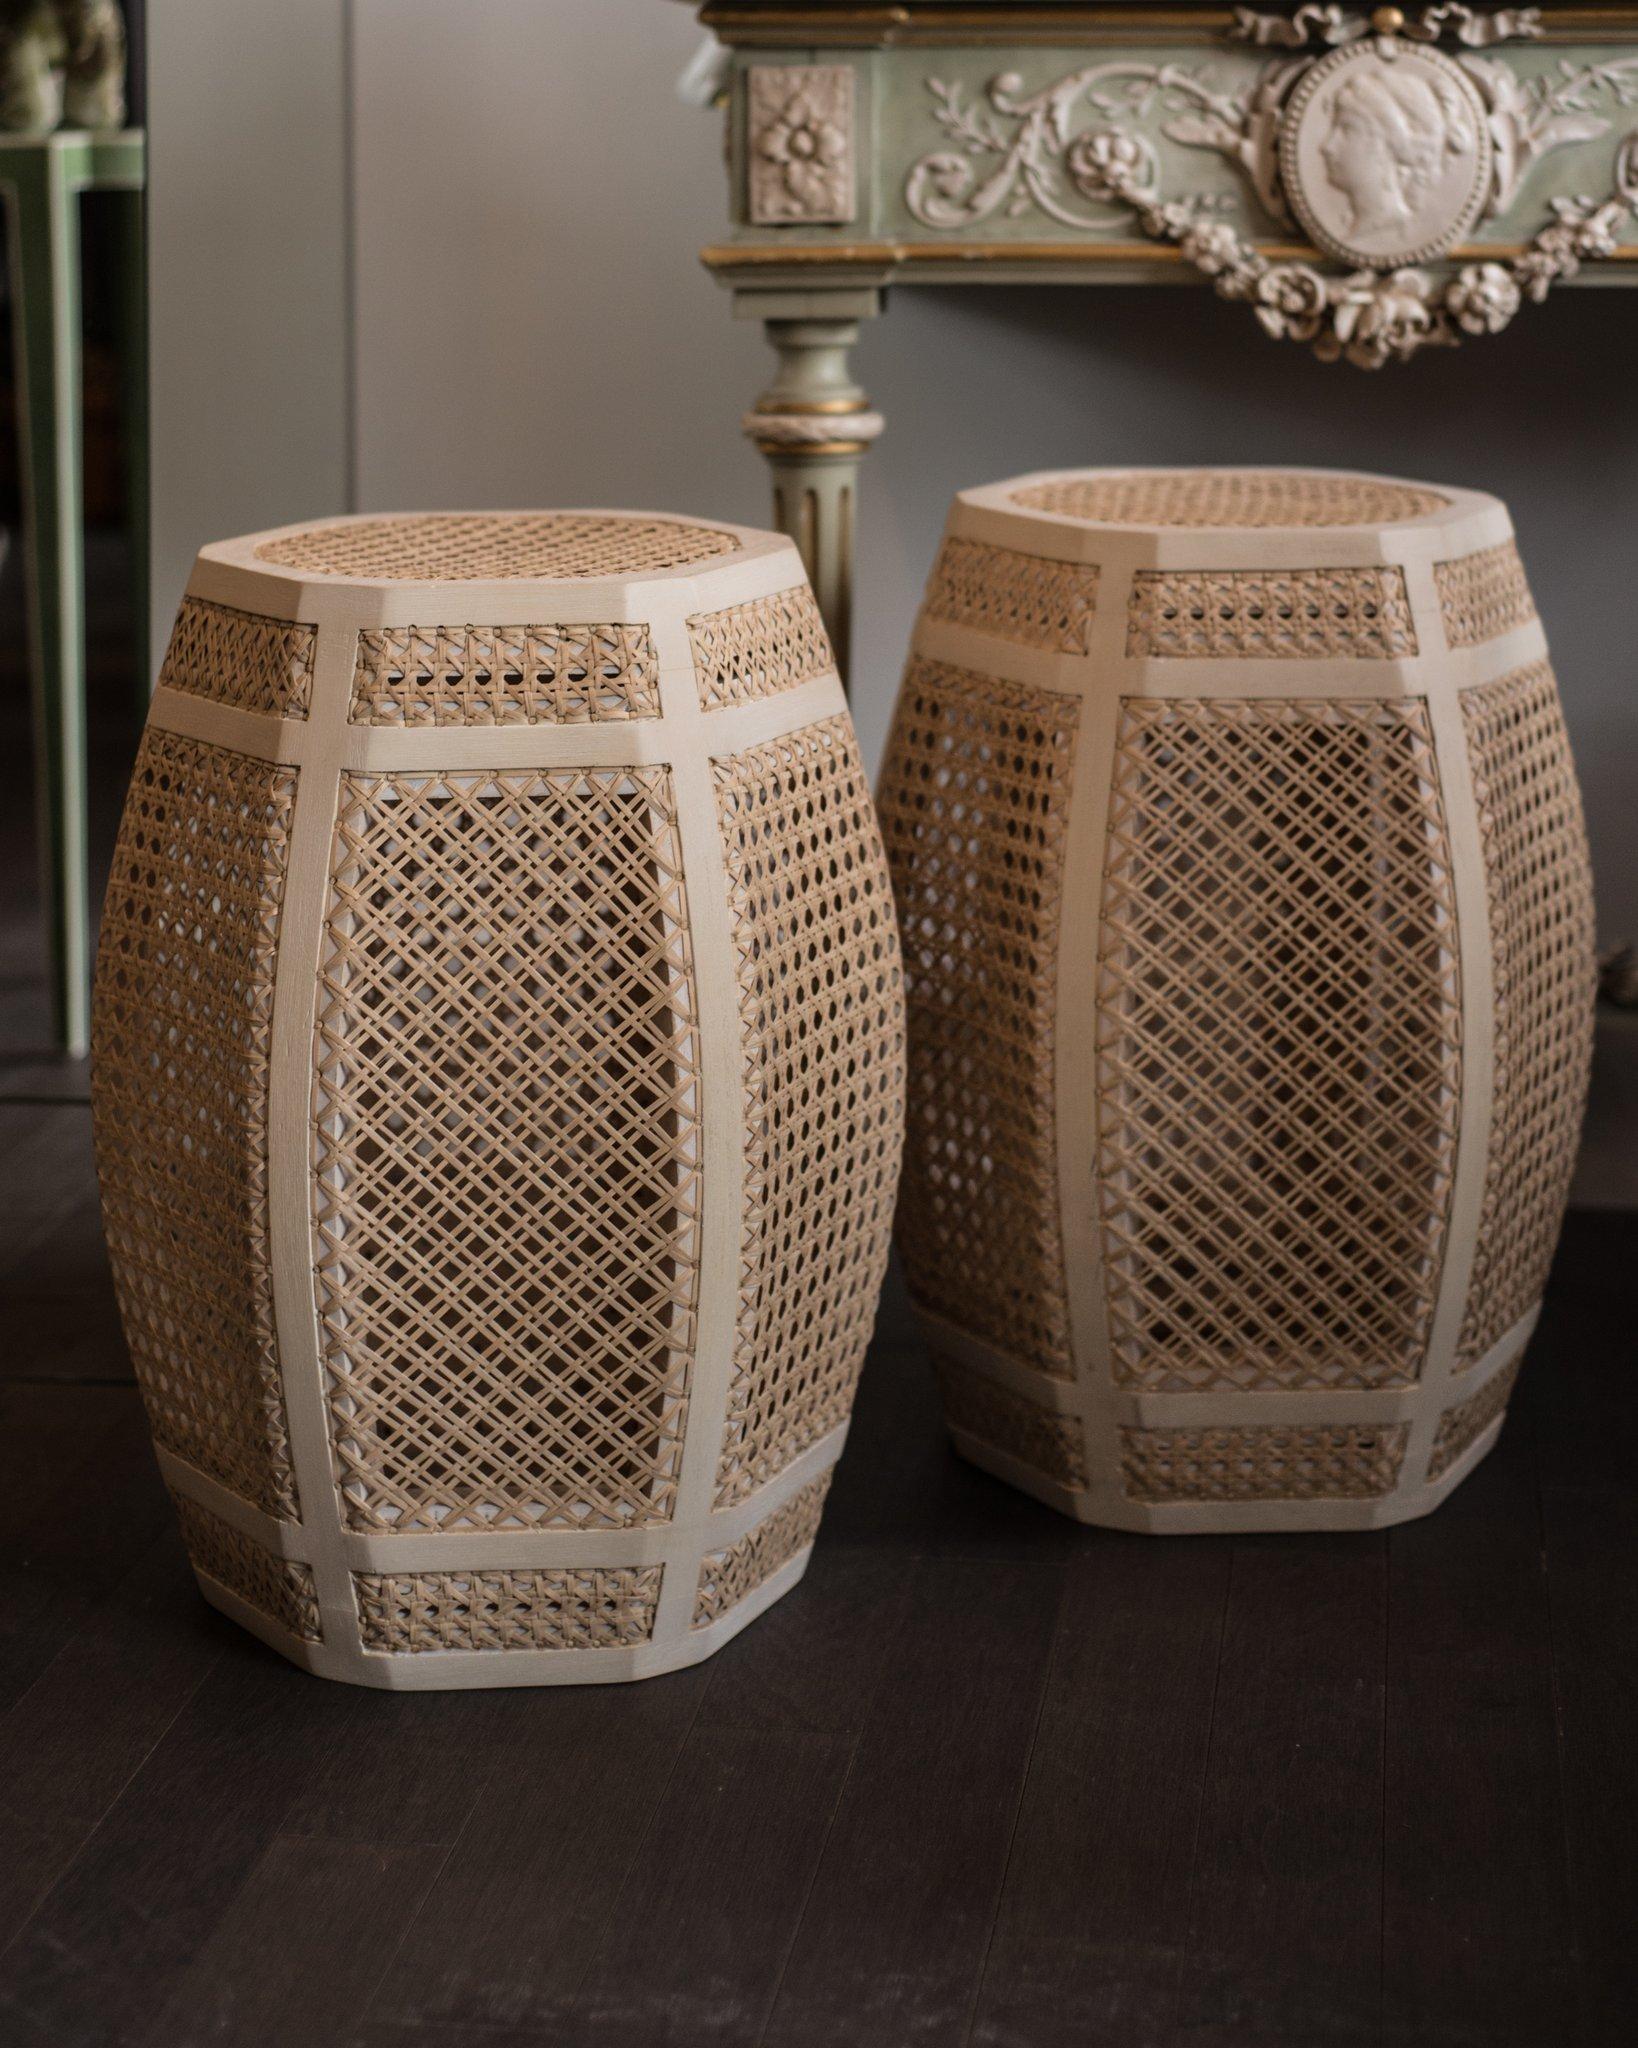 From Jean Michel Frank to the house of Dior, rattan has always had a place in the design world and is now experiencing a revival. These rattan ottomans showcase this Classic technique, reinterpreted in a modern way. Placed on either side of a couch